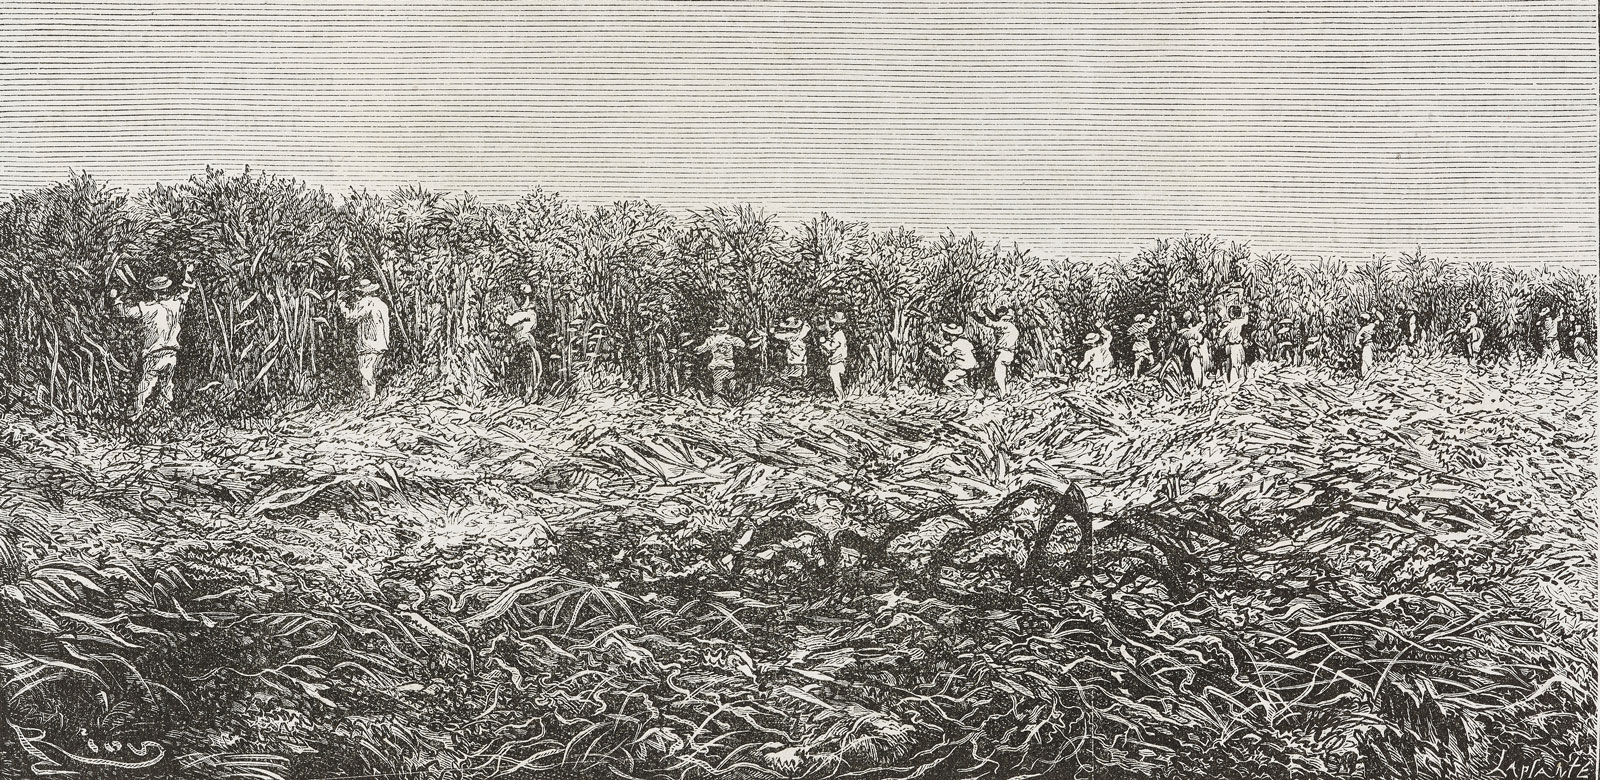 A drawing of a sugar cane field in South Carolina, by Edouard Riou, late nineteenth century